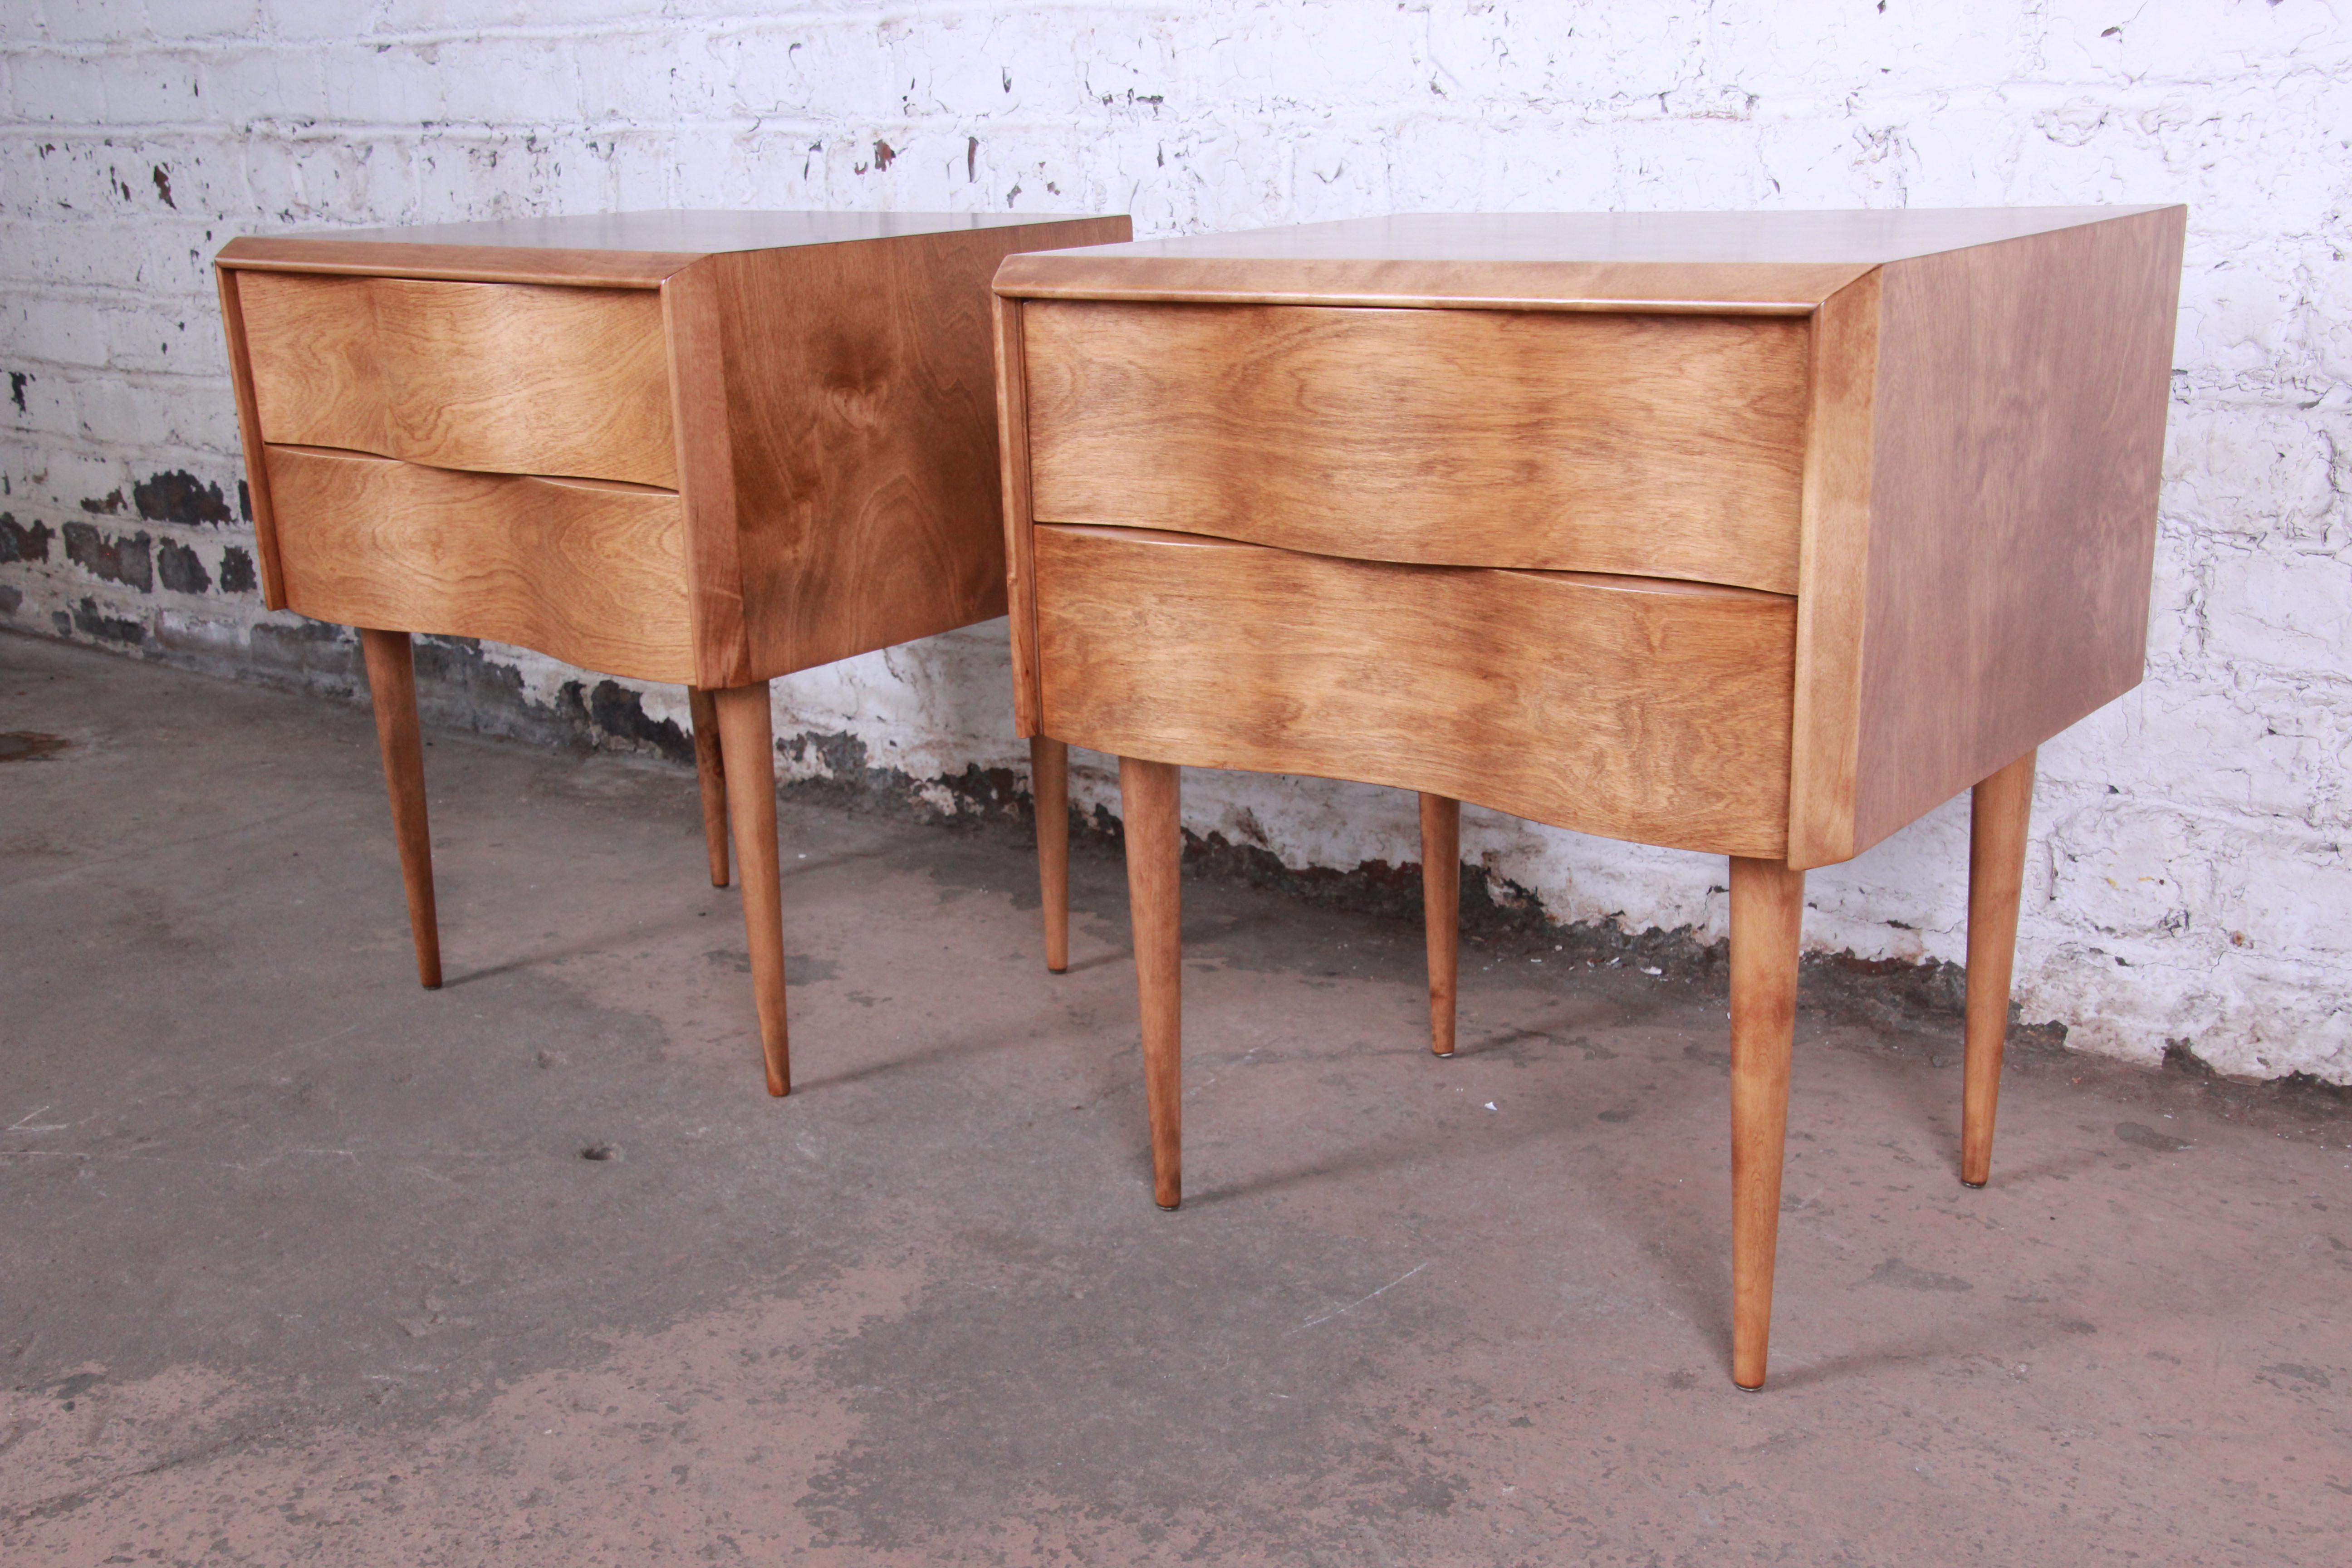 Offering a rare and exceptional pair of Mid-Century Modern nightstands designed by Edmond Spence. The nightstands feature a unique wave front design and stunning birchwood grain. They offer good storage, each with two deep dovetailed drawers. The